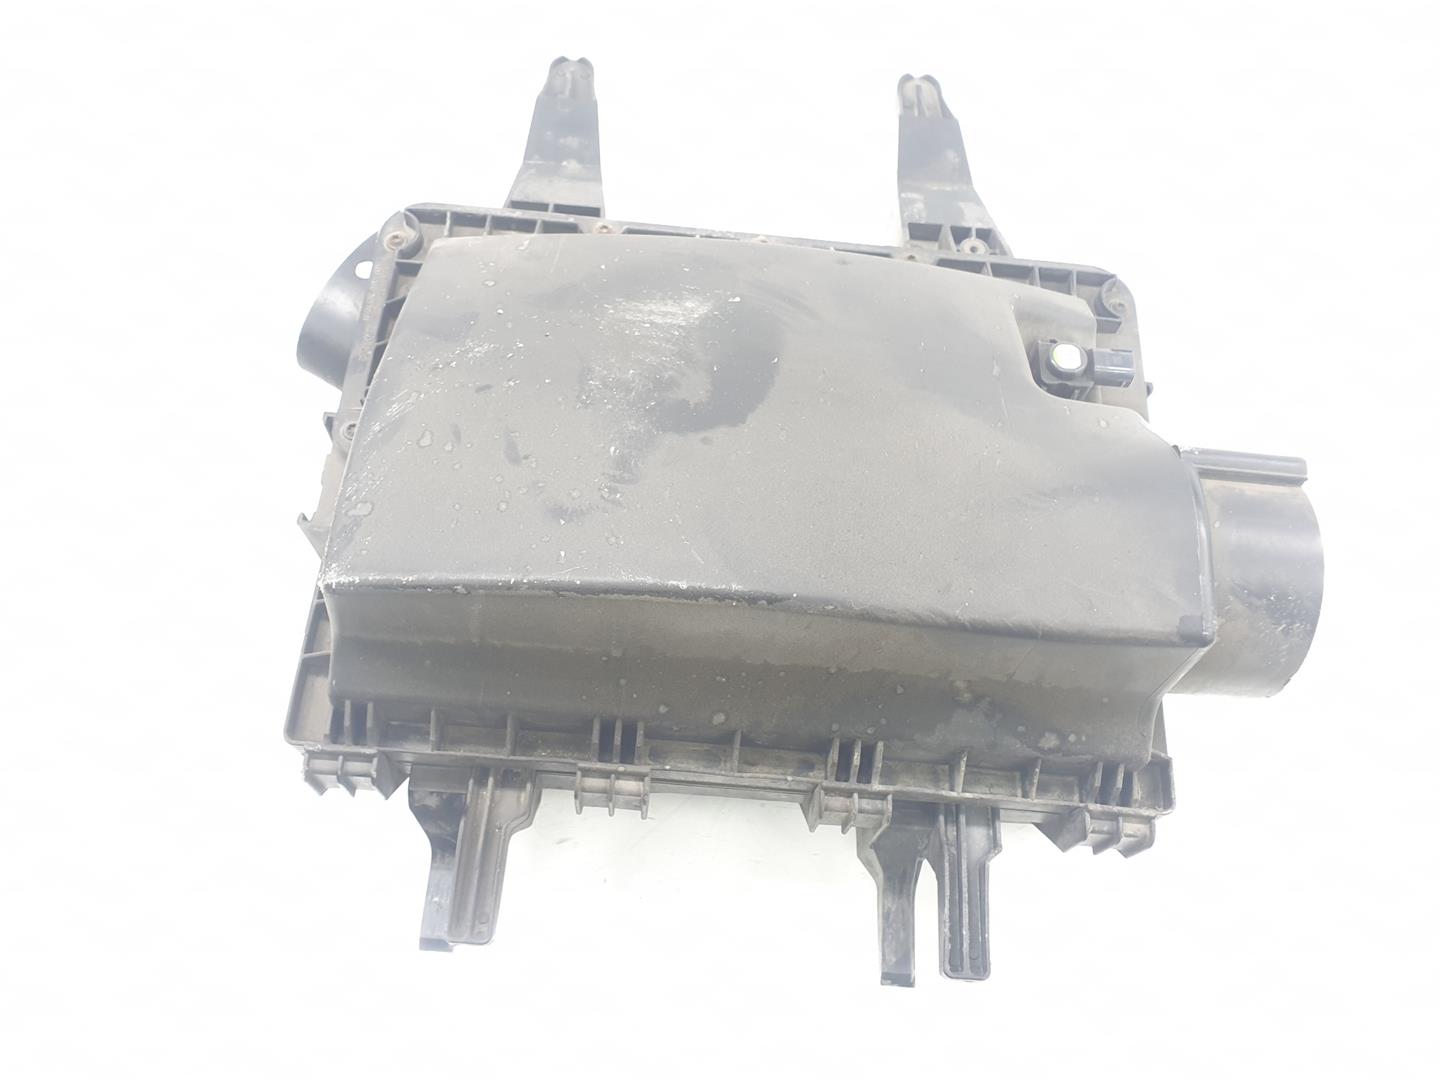 VOLKSWAGEN Crafter 1 generation (2006-2016) Other Engine Compartment Parts 9065280206, 2E0129601D 24252611